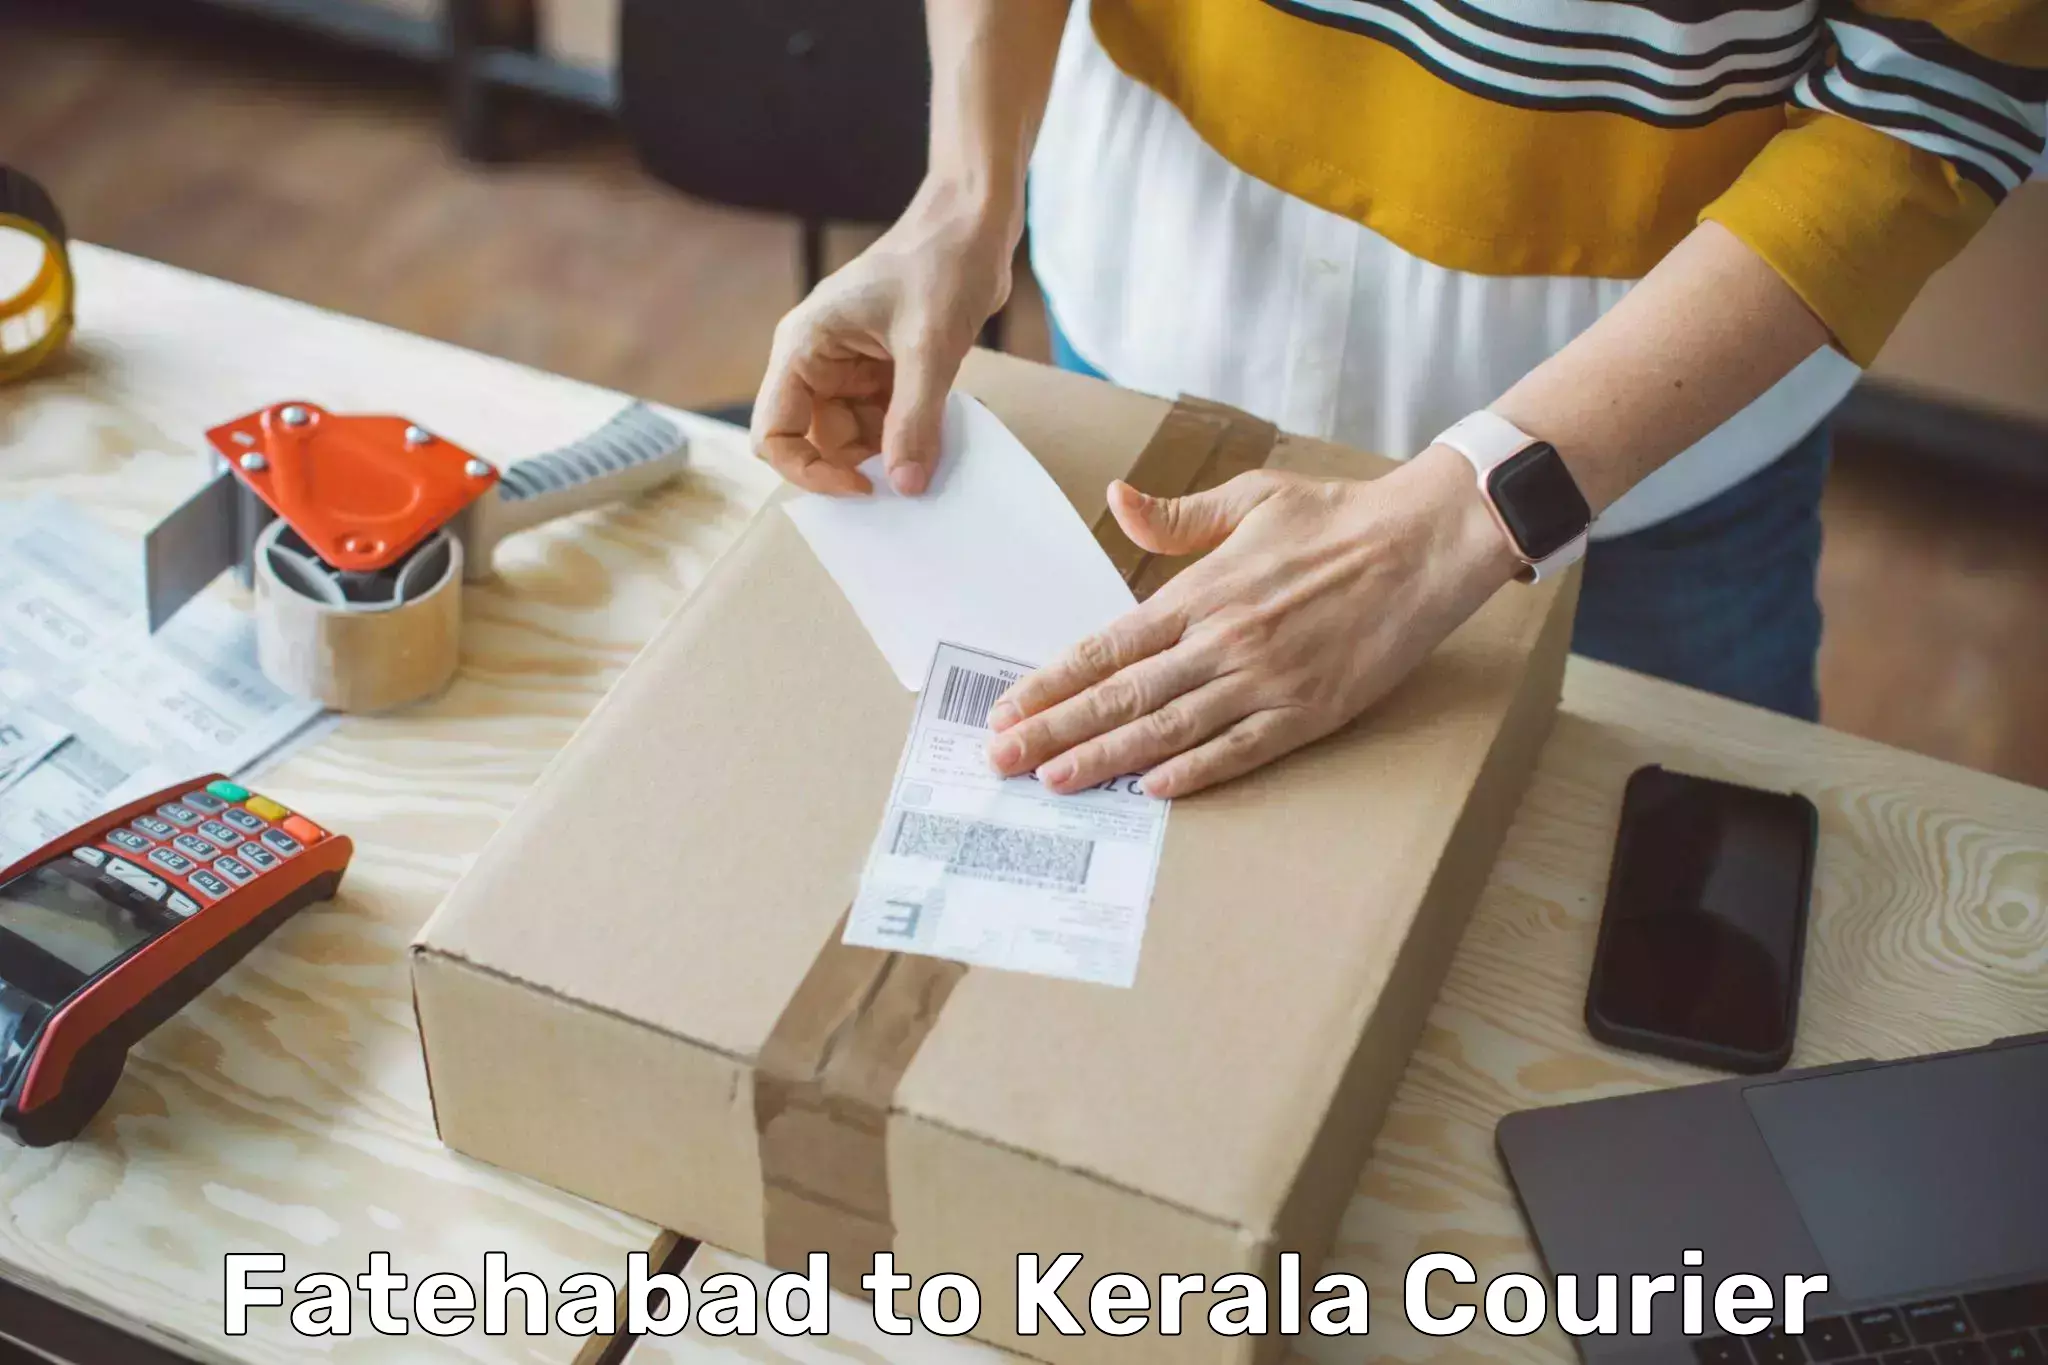 Subscription-based courier Fatehabad to Kerala